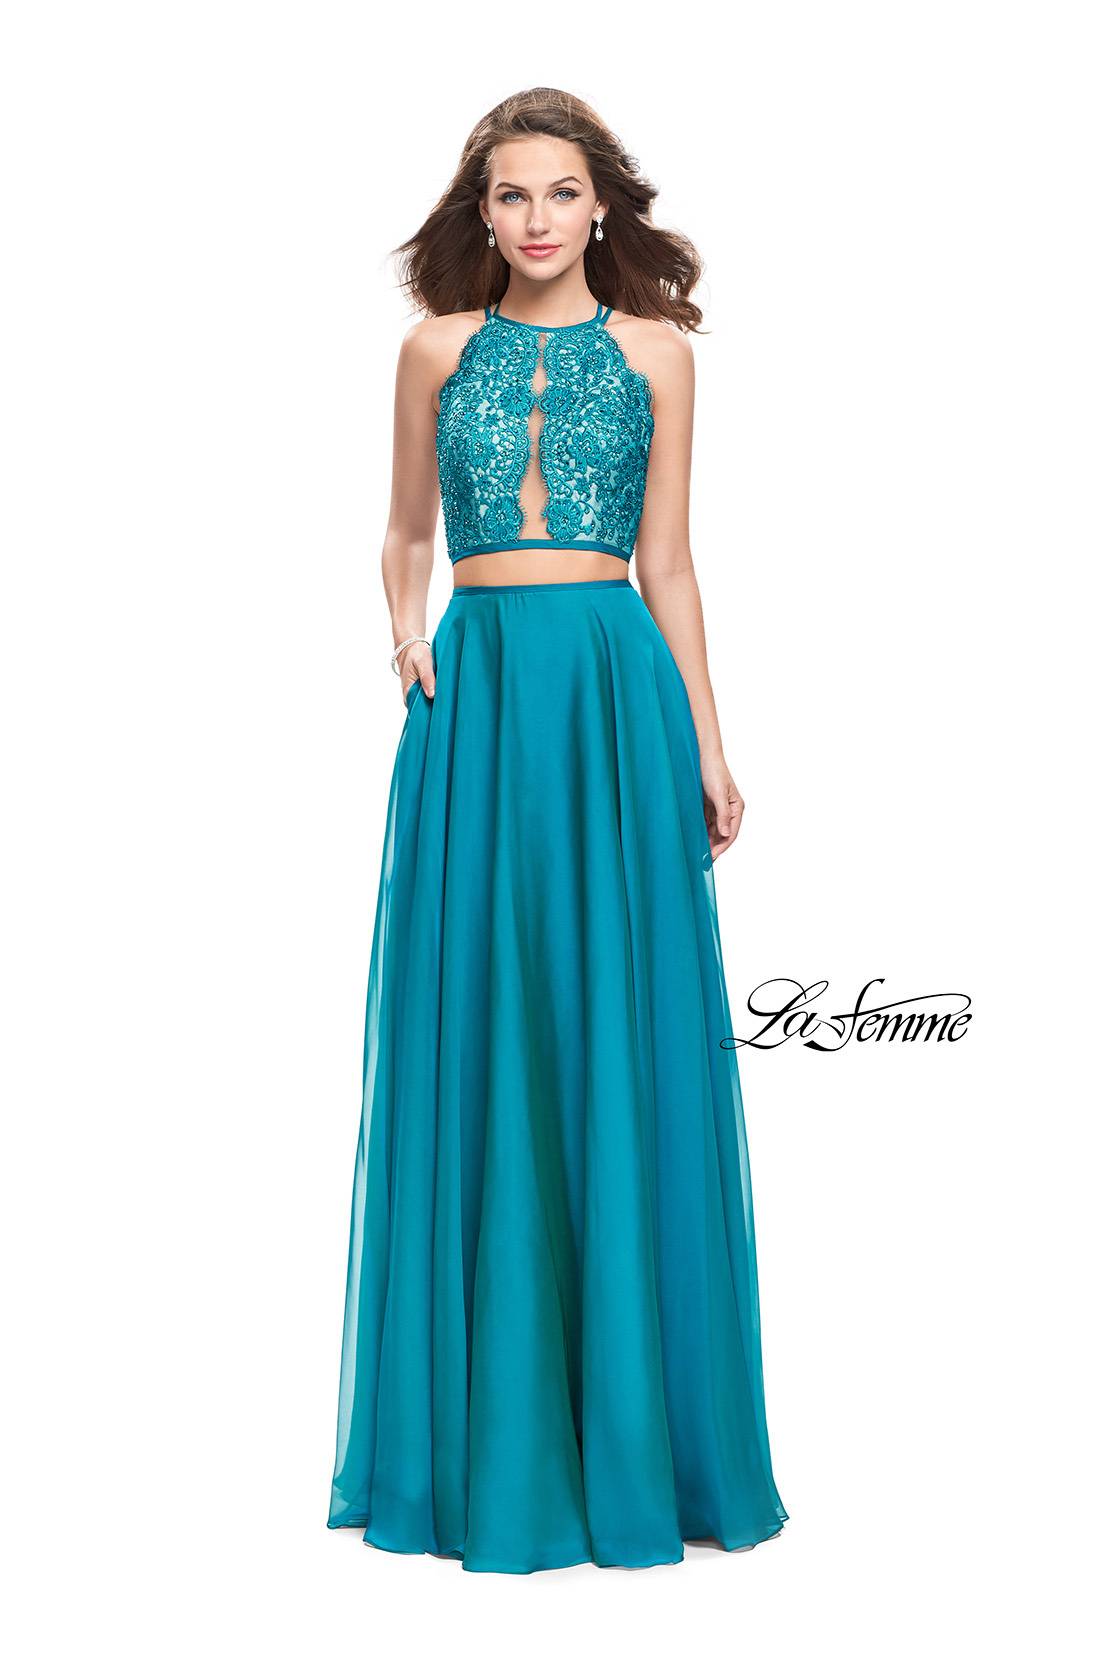 Teal Two Piece Prom Dress with Lace Top and Pockets